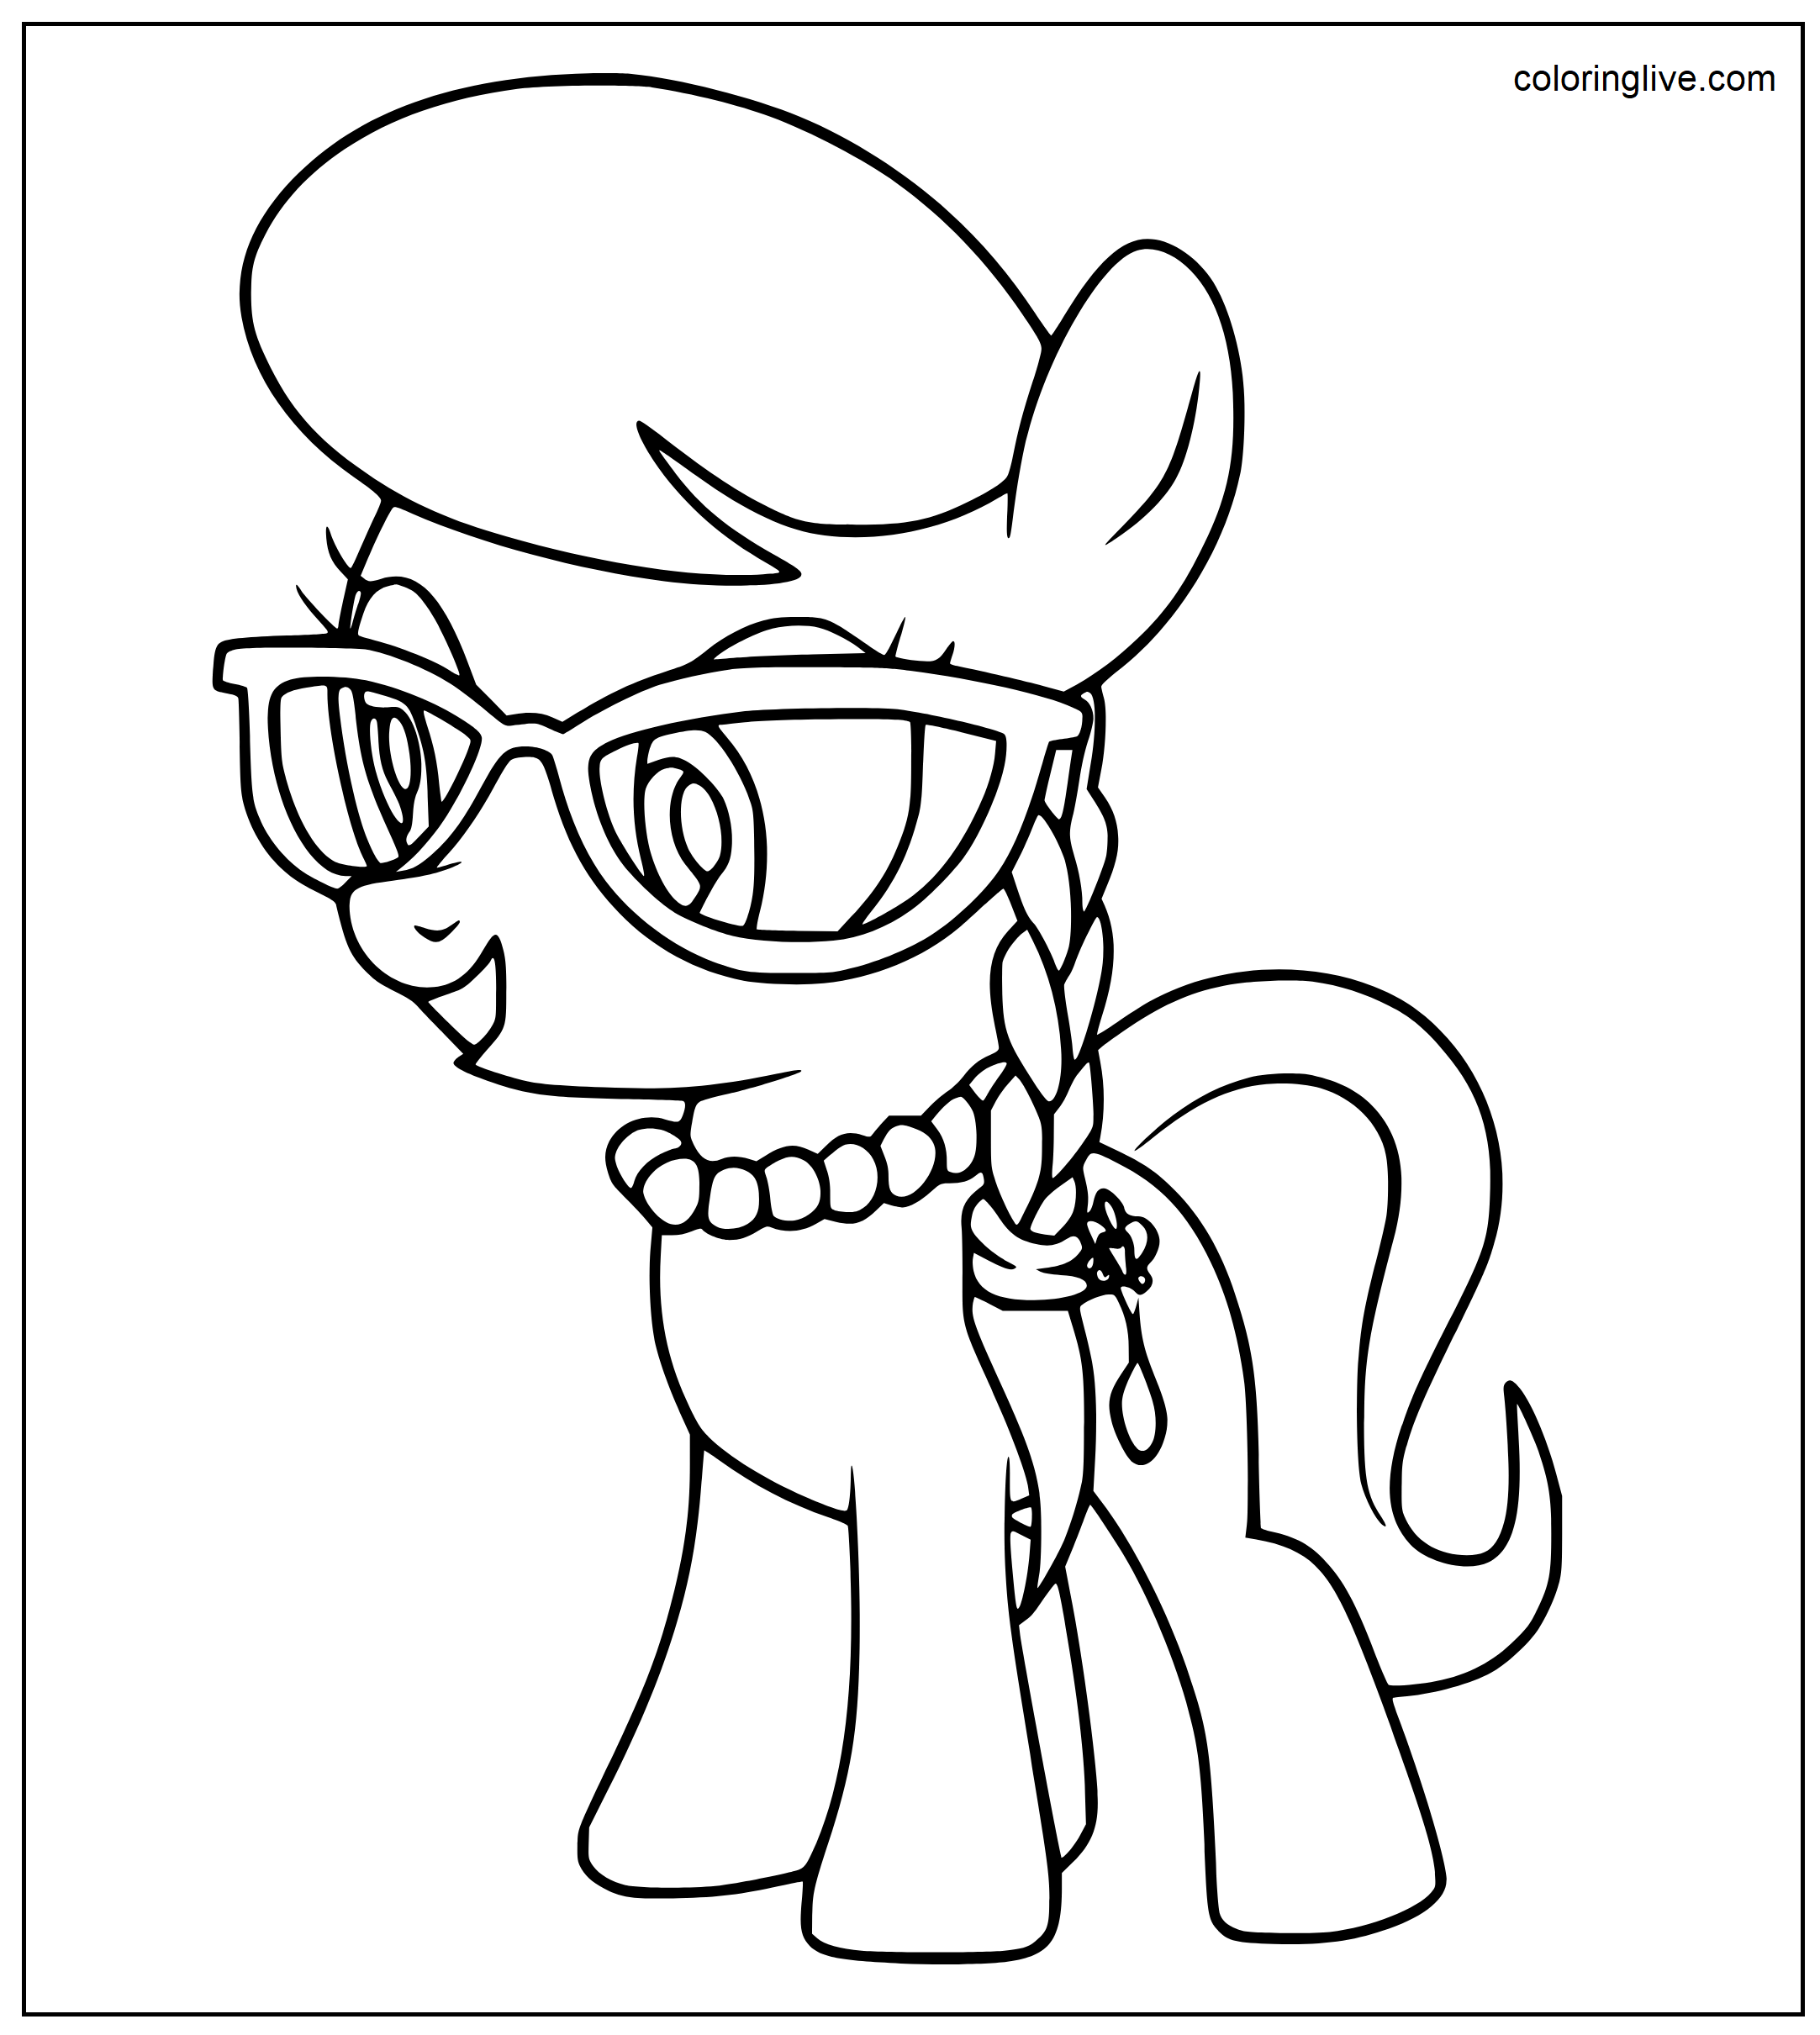 Printable Silver Spoon MLP Coloring Page for kids.